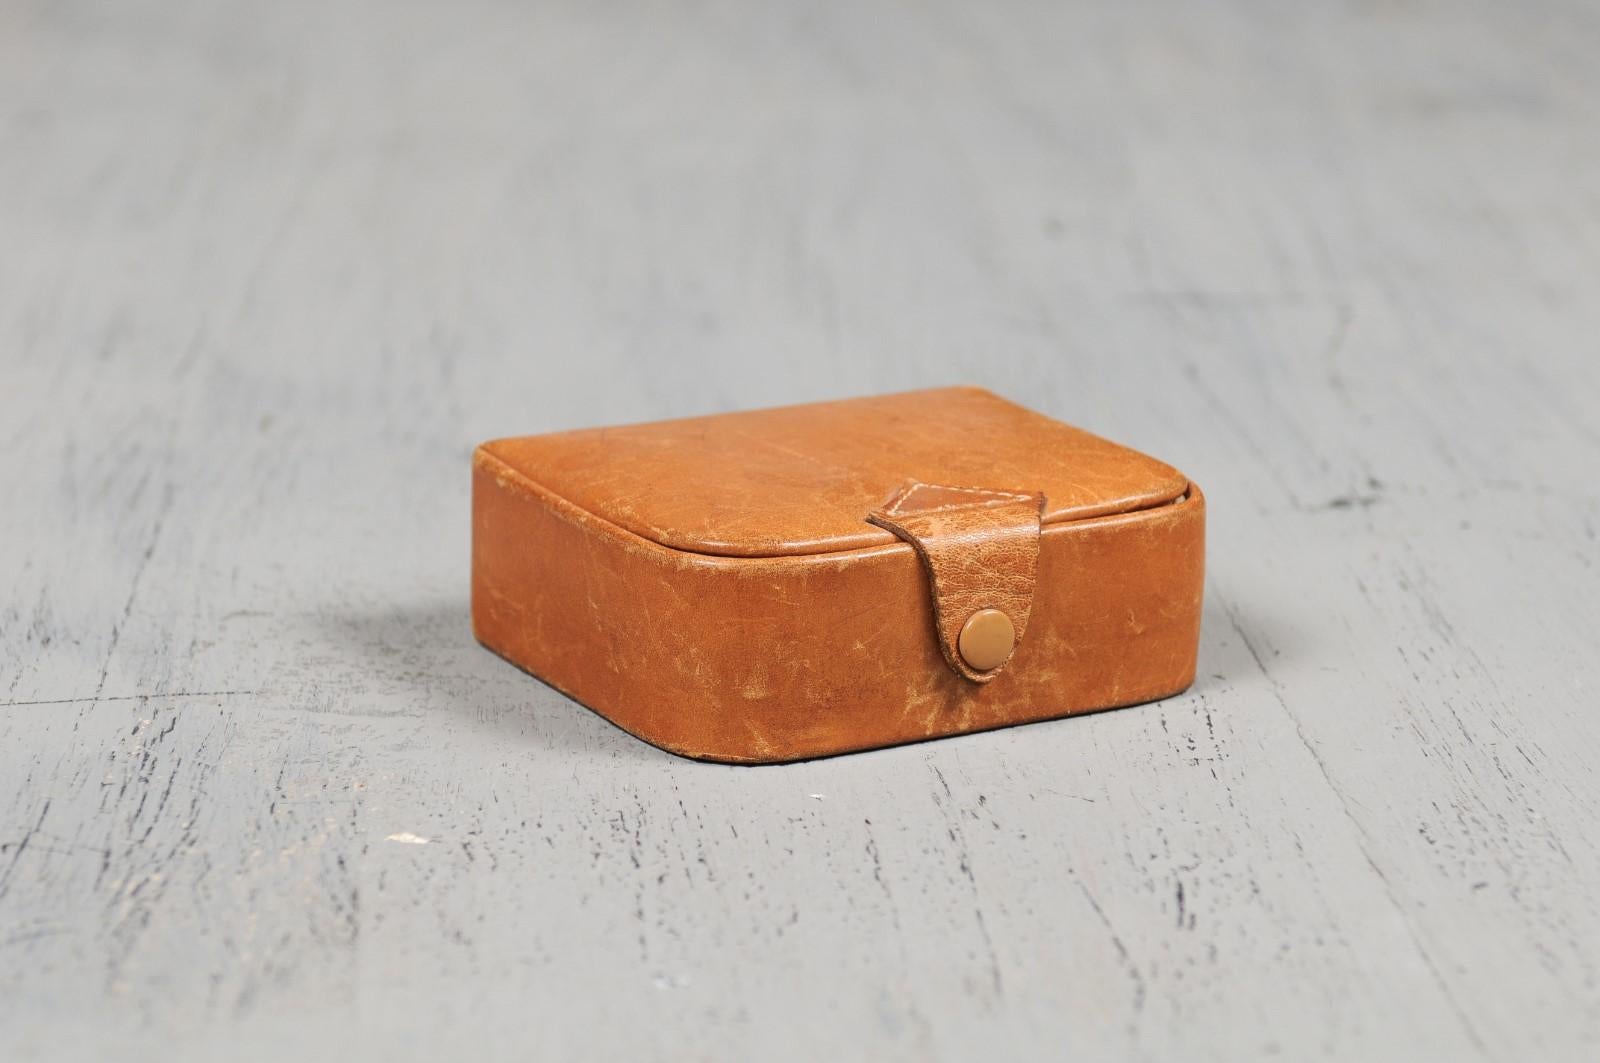 A small antique Camalier & Buckley leather case from the 20th century with buttoned strap. Founded in the 1930s in the United States, Camalier & Buckley produced this handsome leather case boasting a caramel color and a small buttoned strap. Perfect